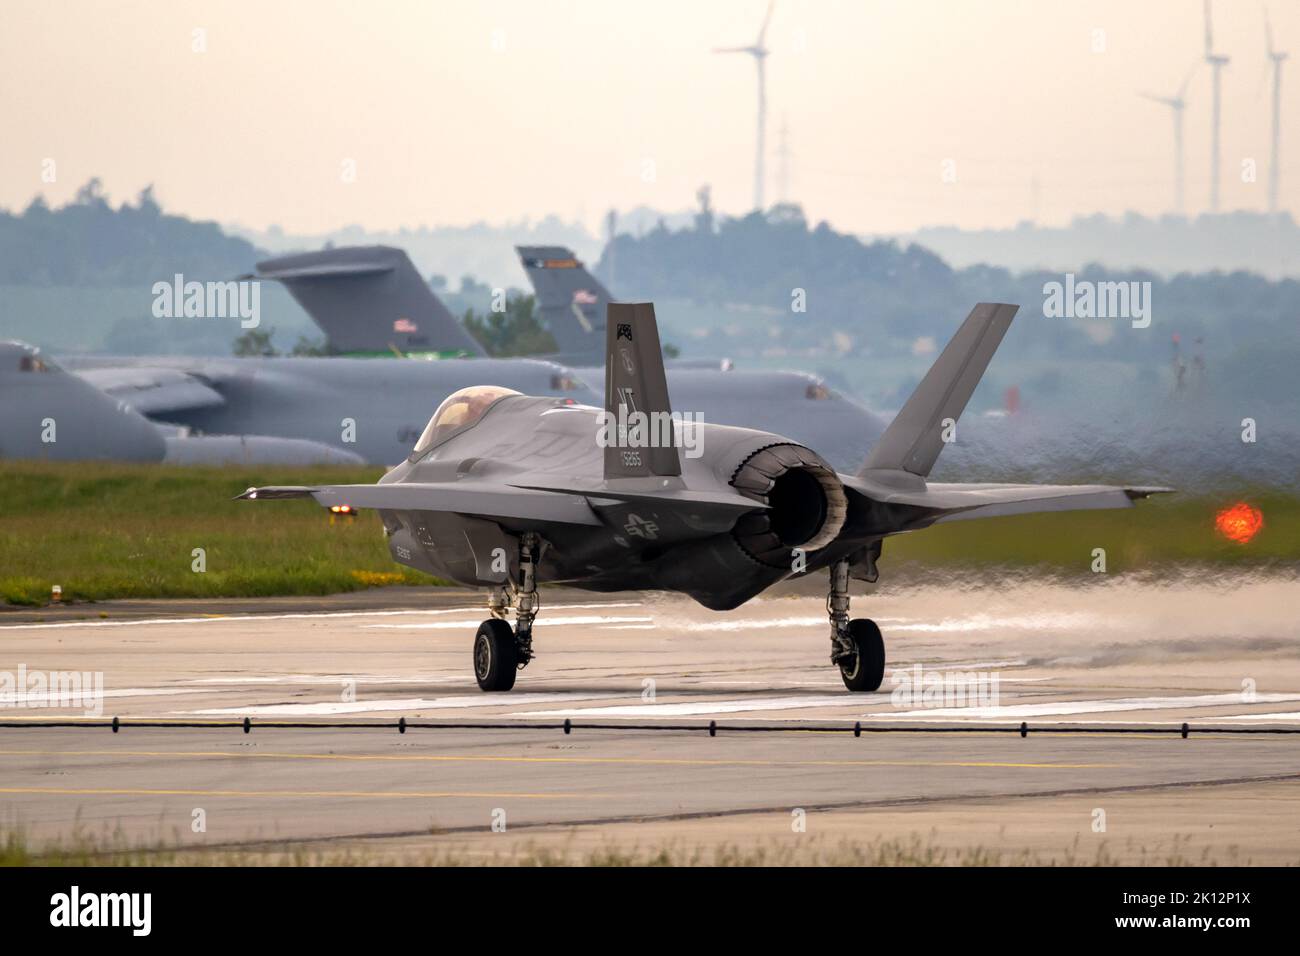 Vermont Air National Guard's 158th Fighter Wing Lockheed Martin F-35 Lightning II fighter jet. Germany - May 17, 2022 Stock Photo